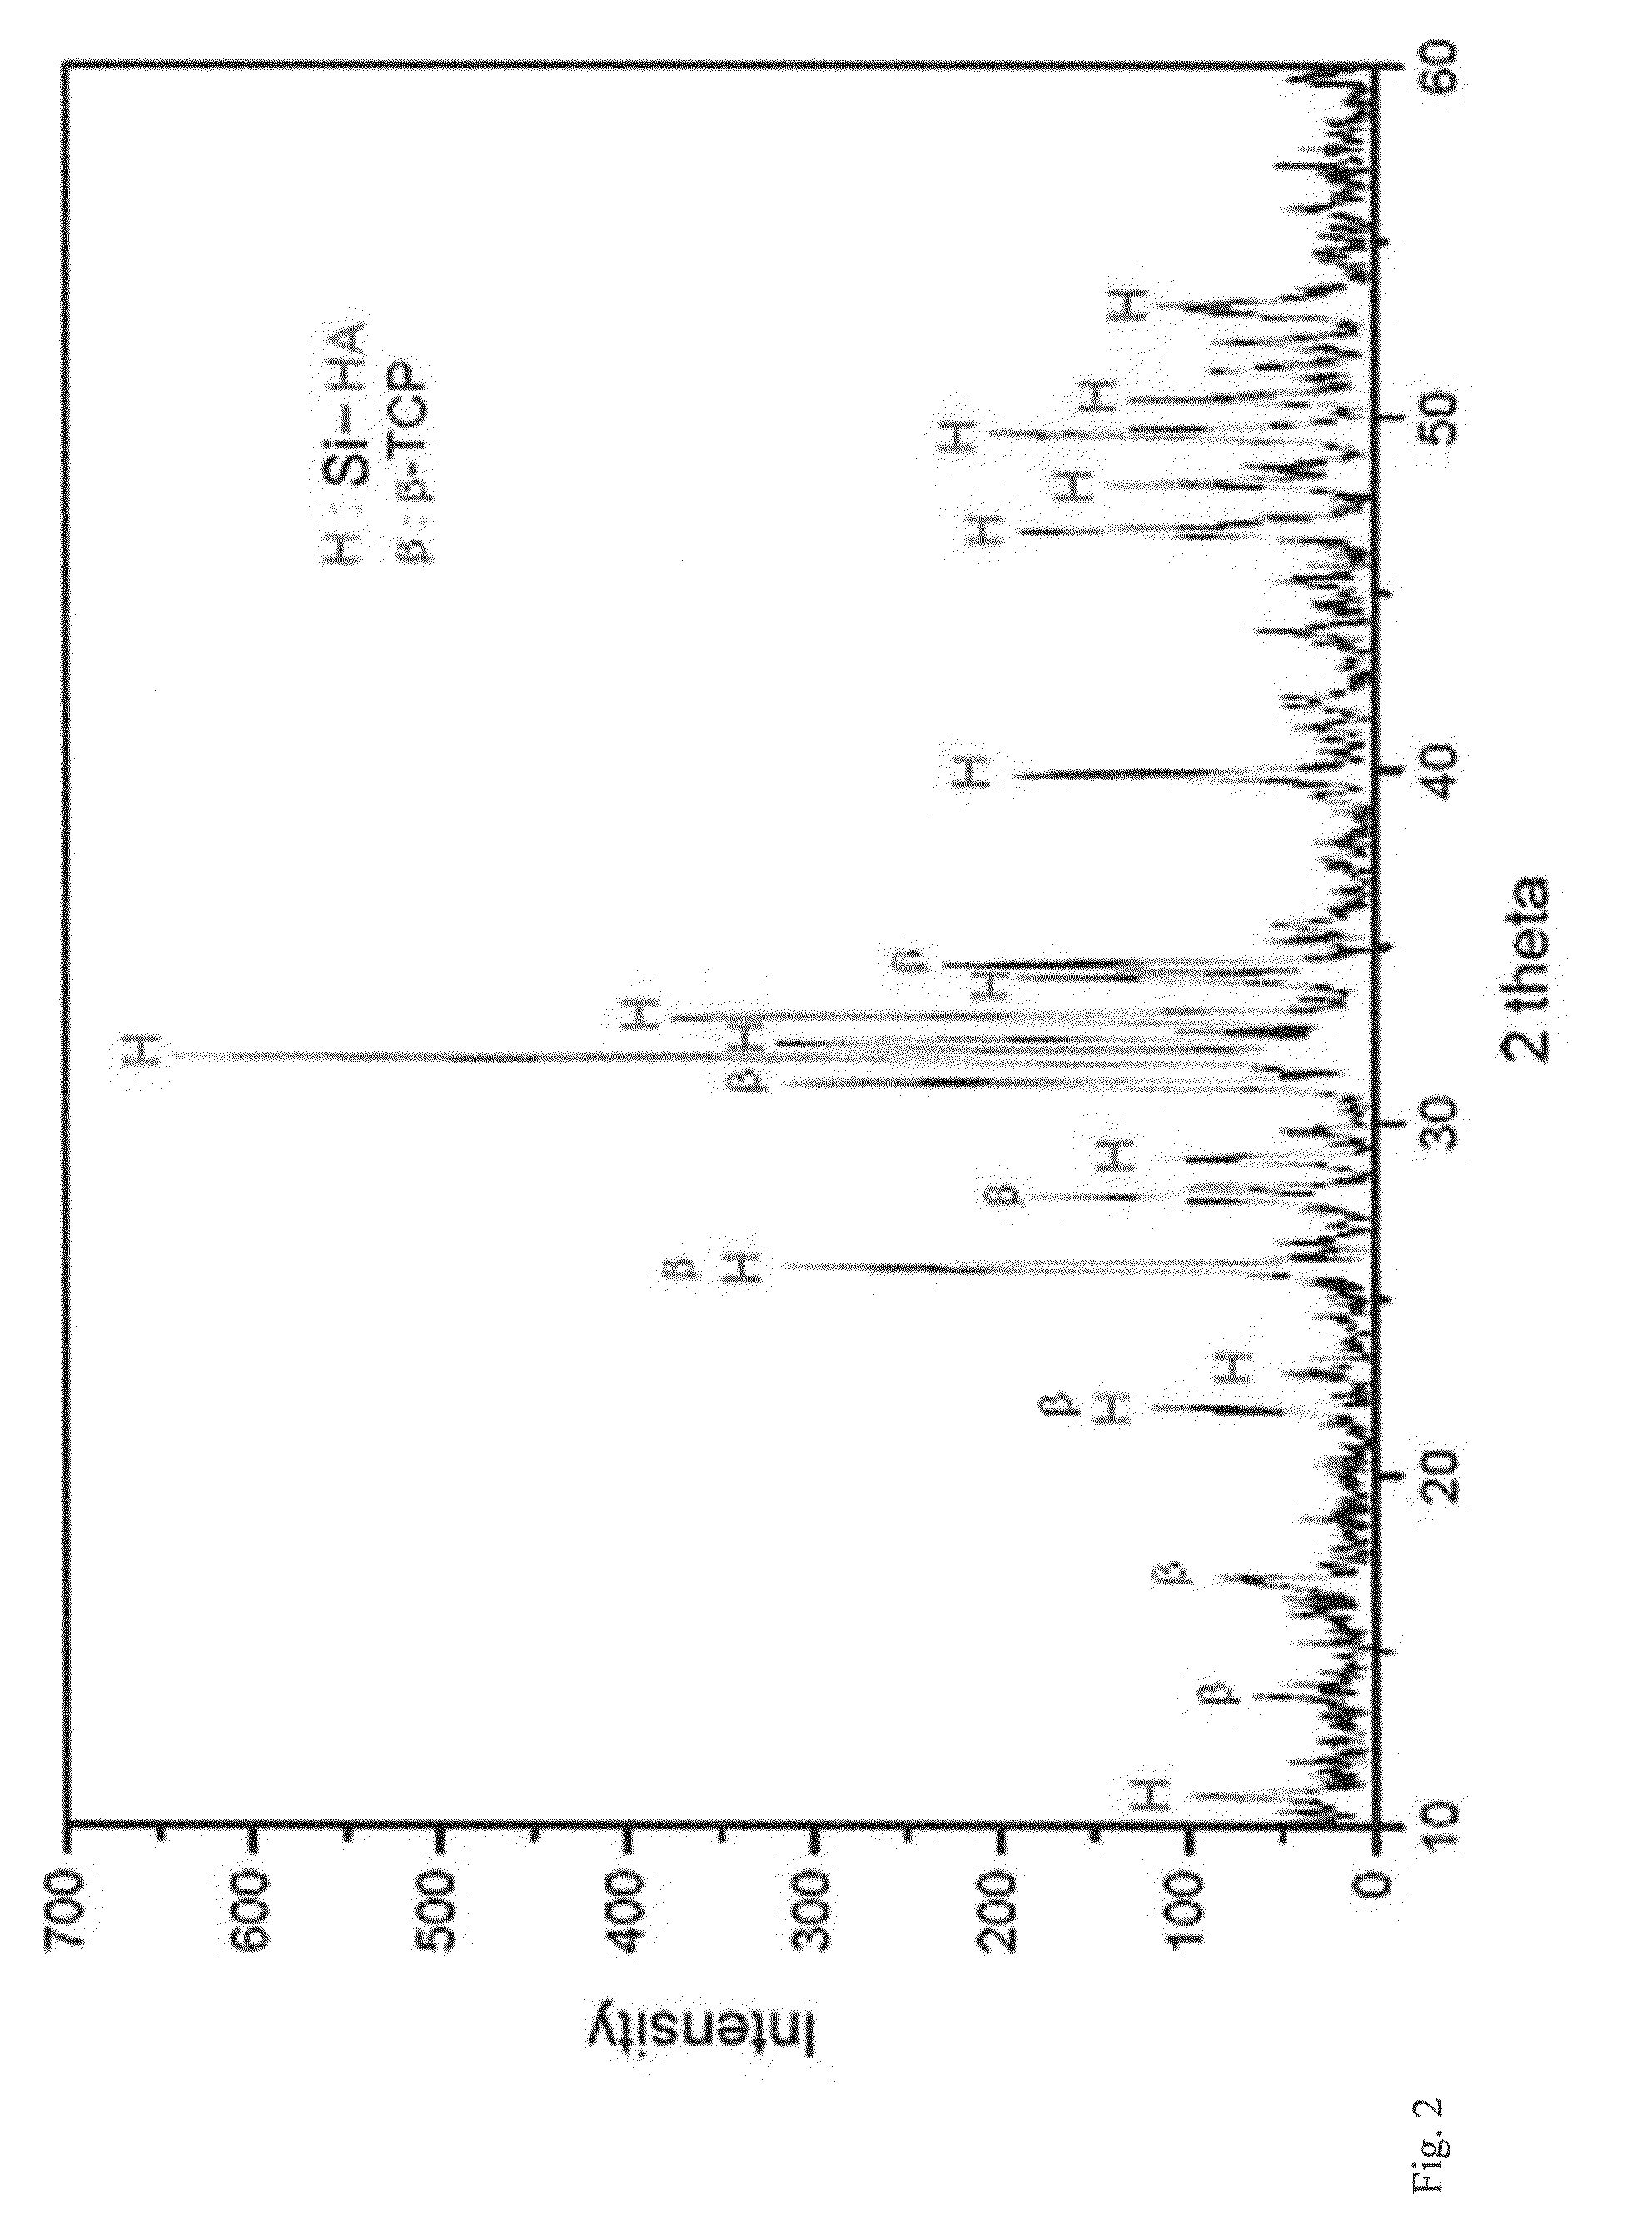 Porous composite comprising silicon-substituted hydroxyapatite and beta-tricalcium phosphate, and process for preparing the same